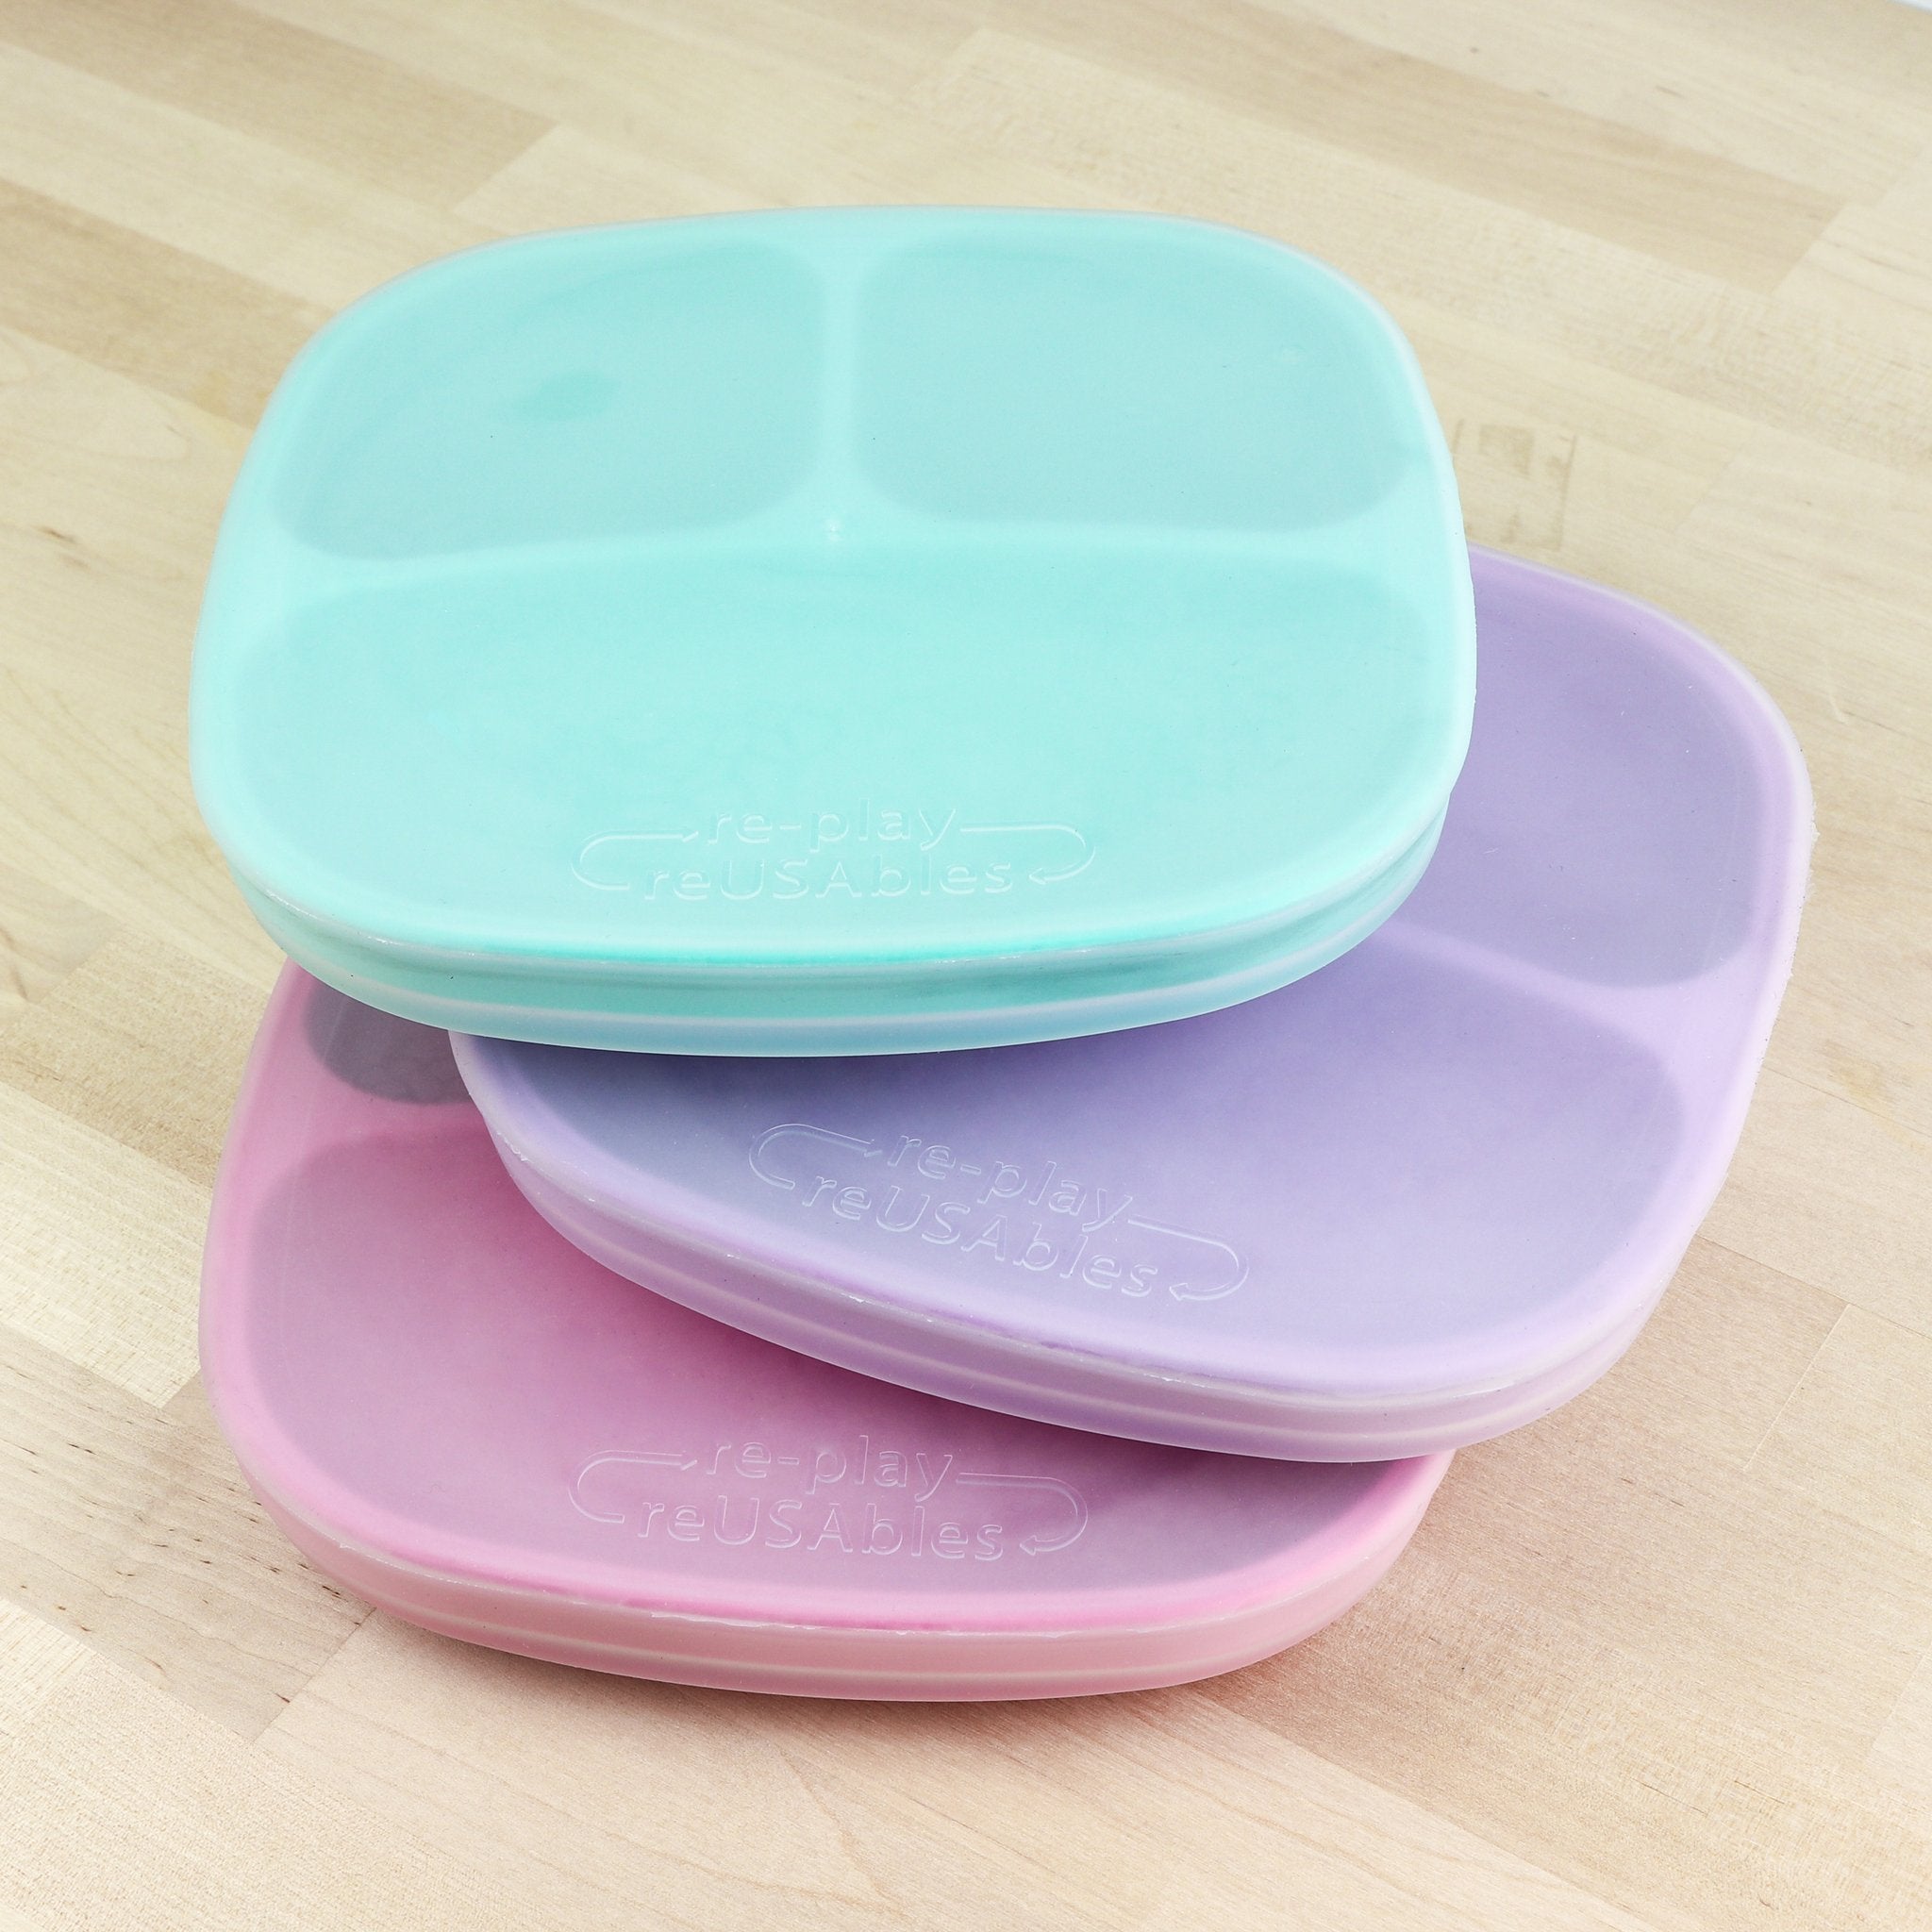 Re-Play - 7" Divided/Flat Plate Silicone Lid Reusable Food Storage All Things Being Eco